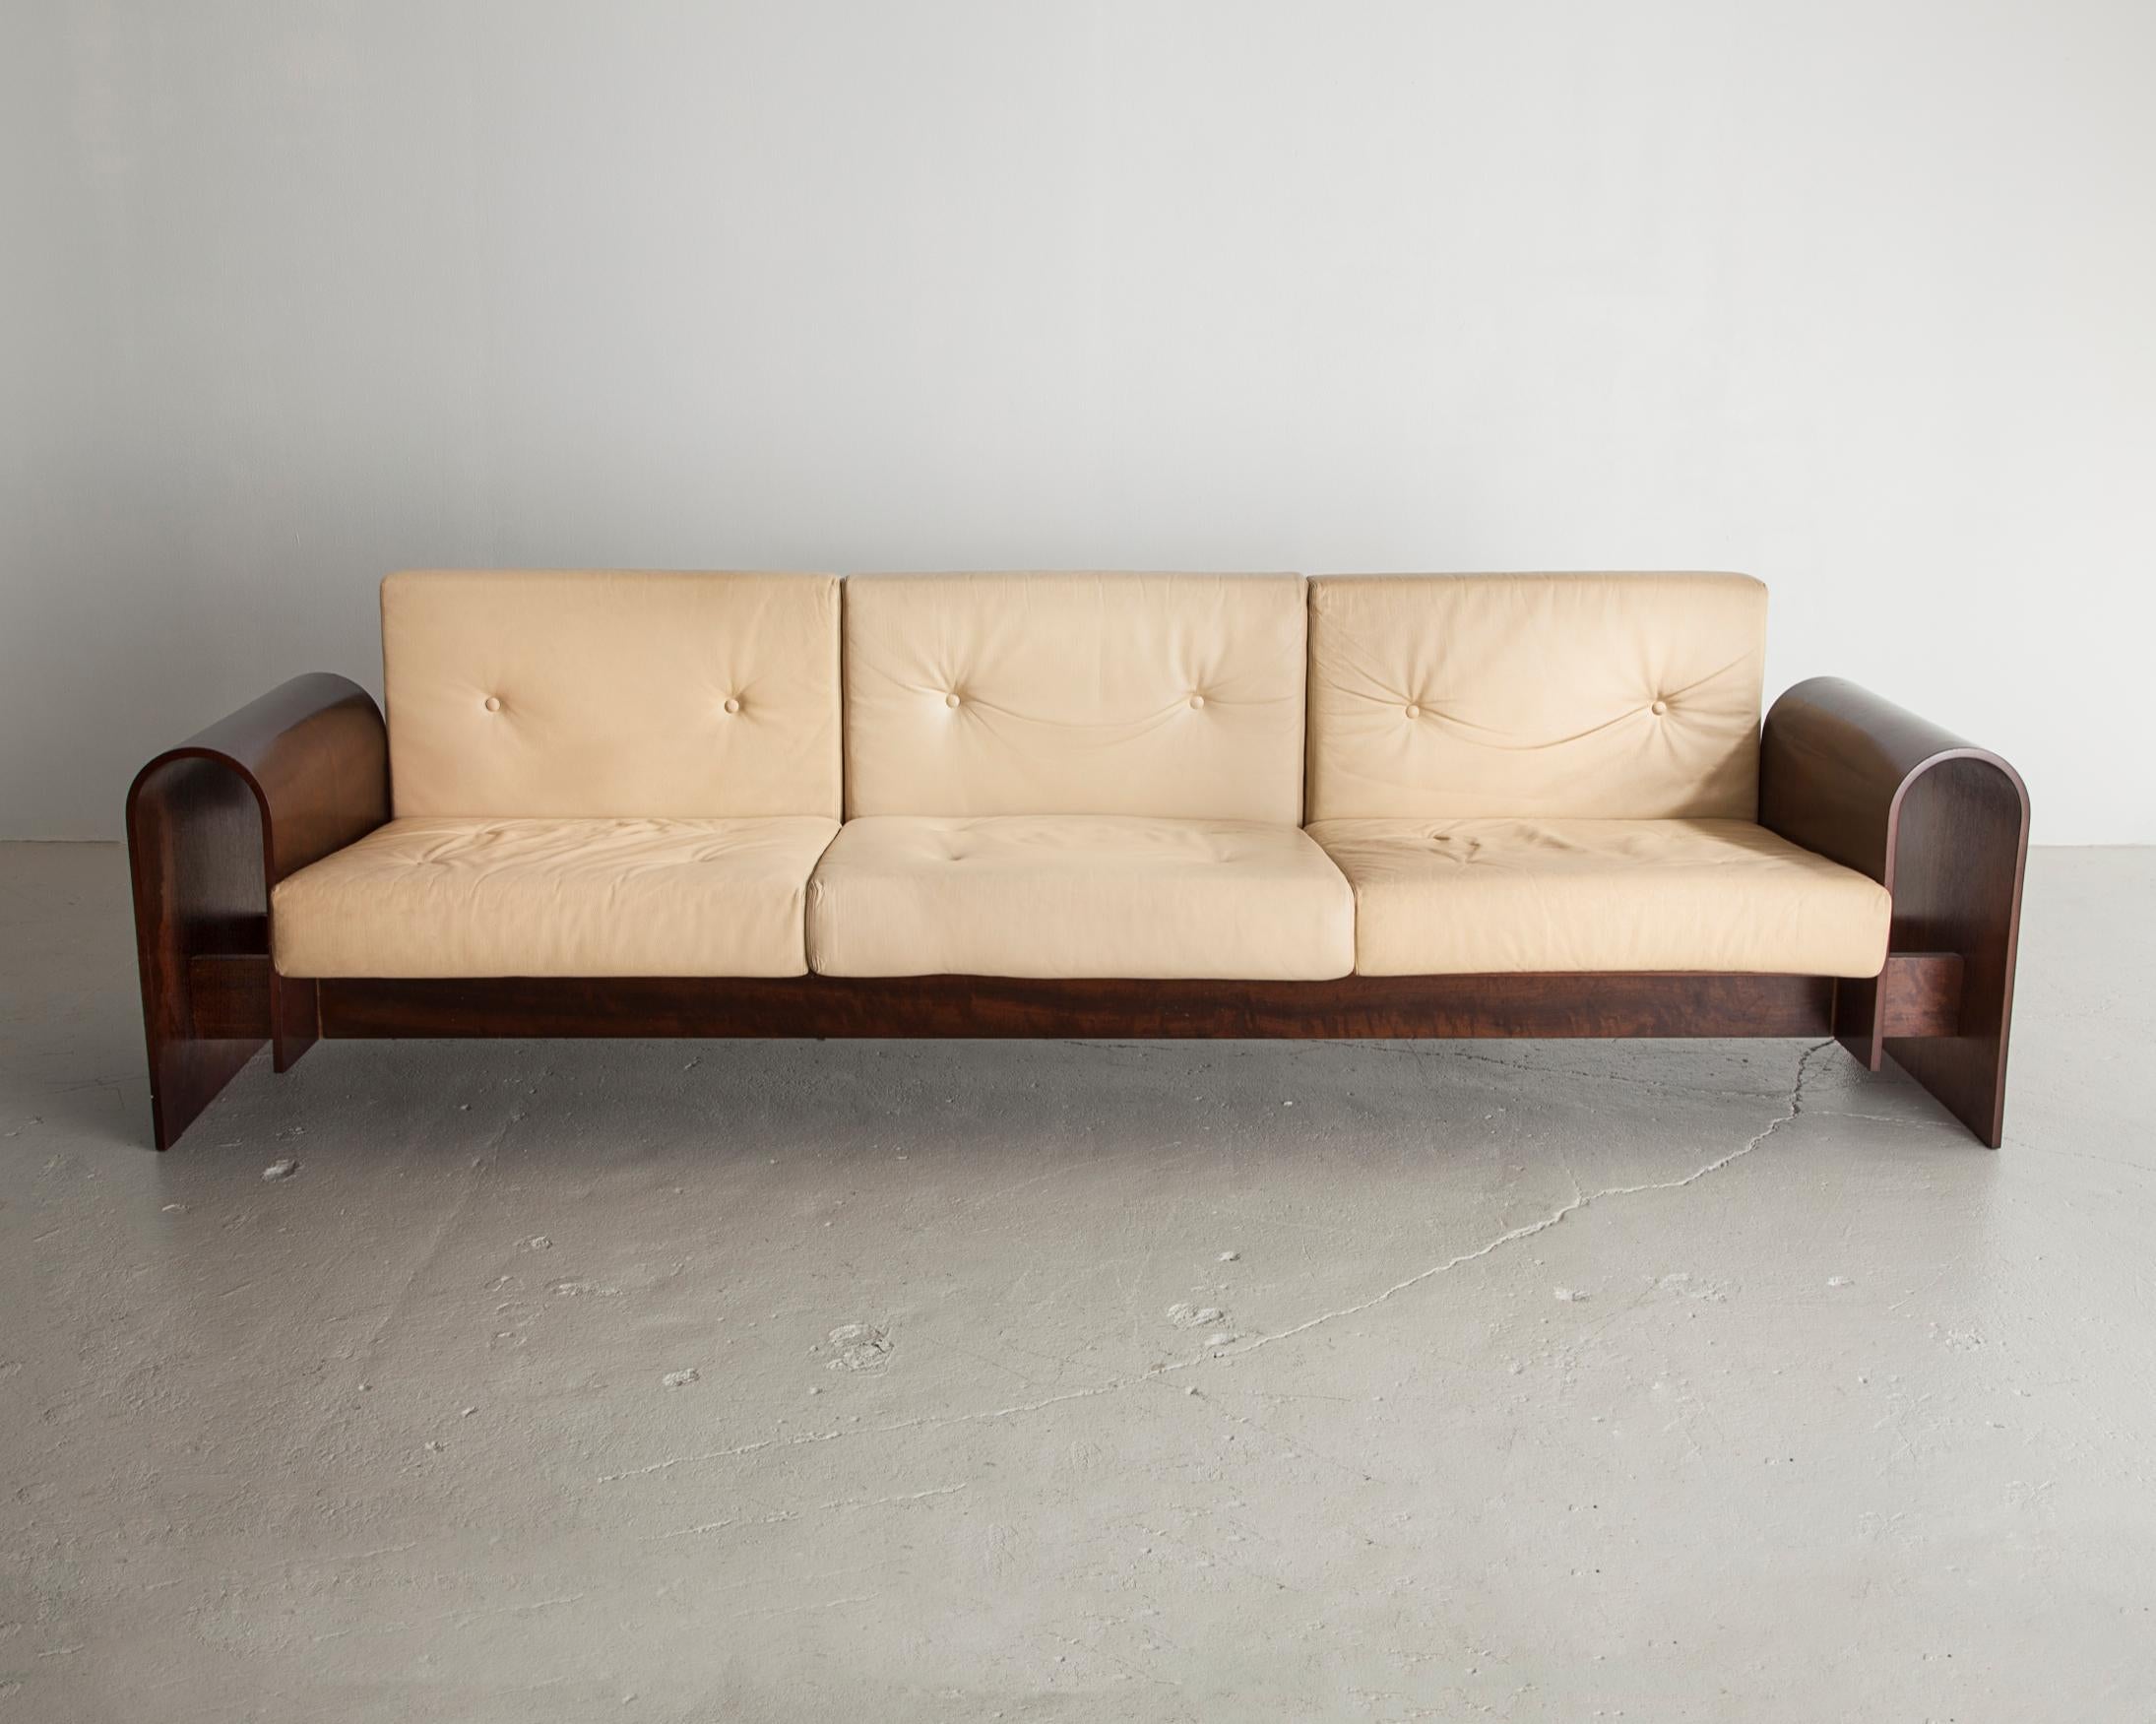 Three-seat sofa in rosewood veneer with upholstered cushions. Designed by Oscar Niemeyer for the SESC hotel, Brazil, 1990.